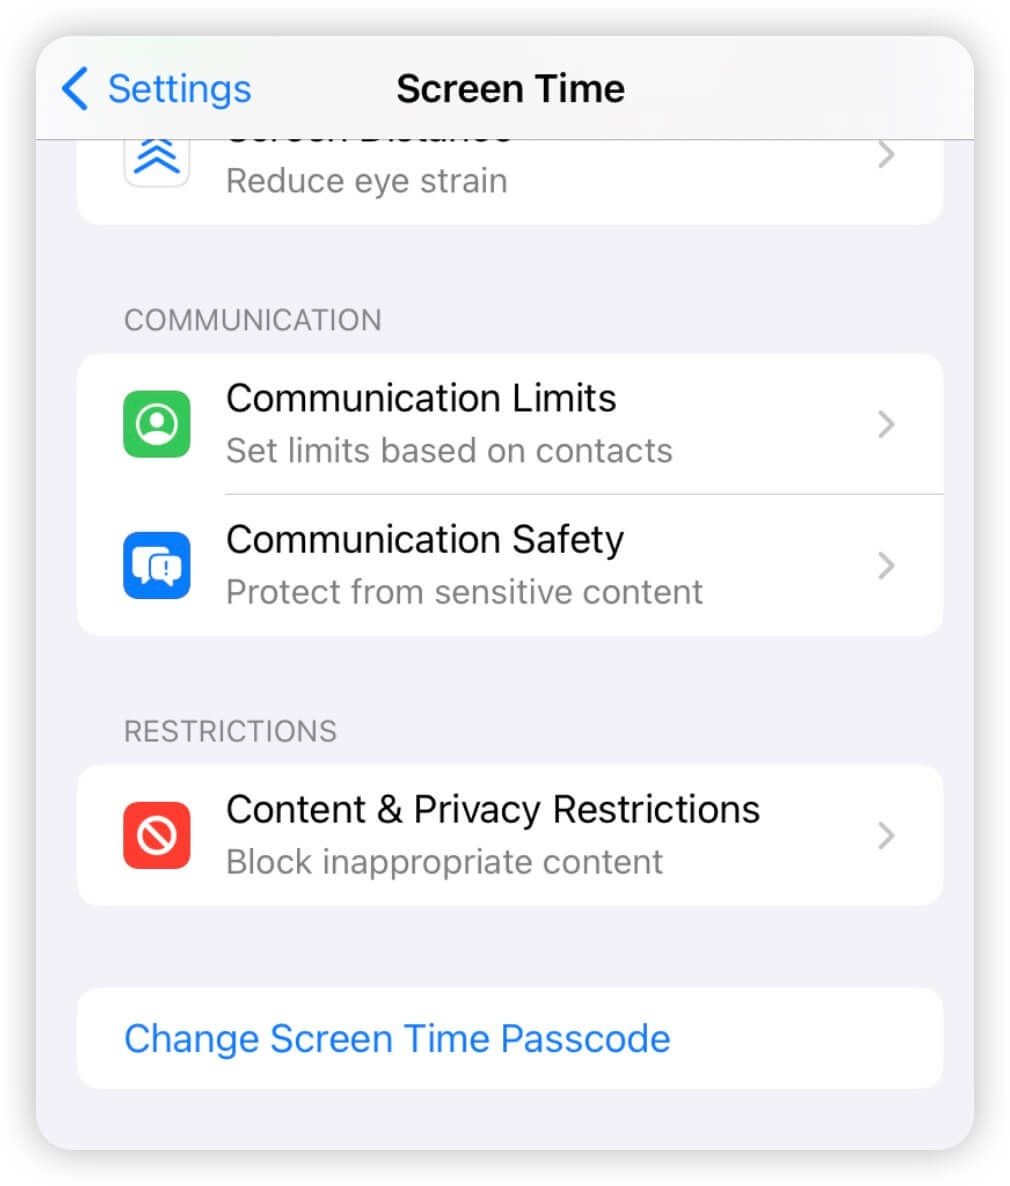 How to change Screen Time passcode on iPhone